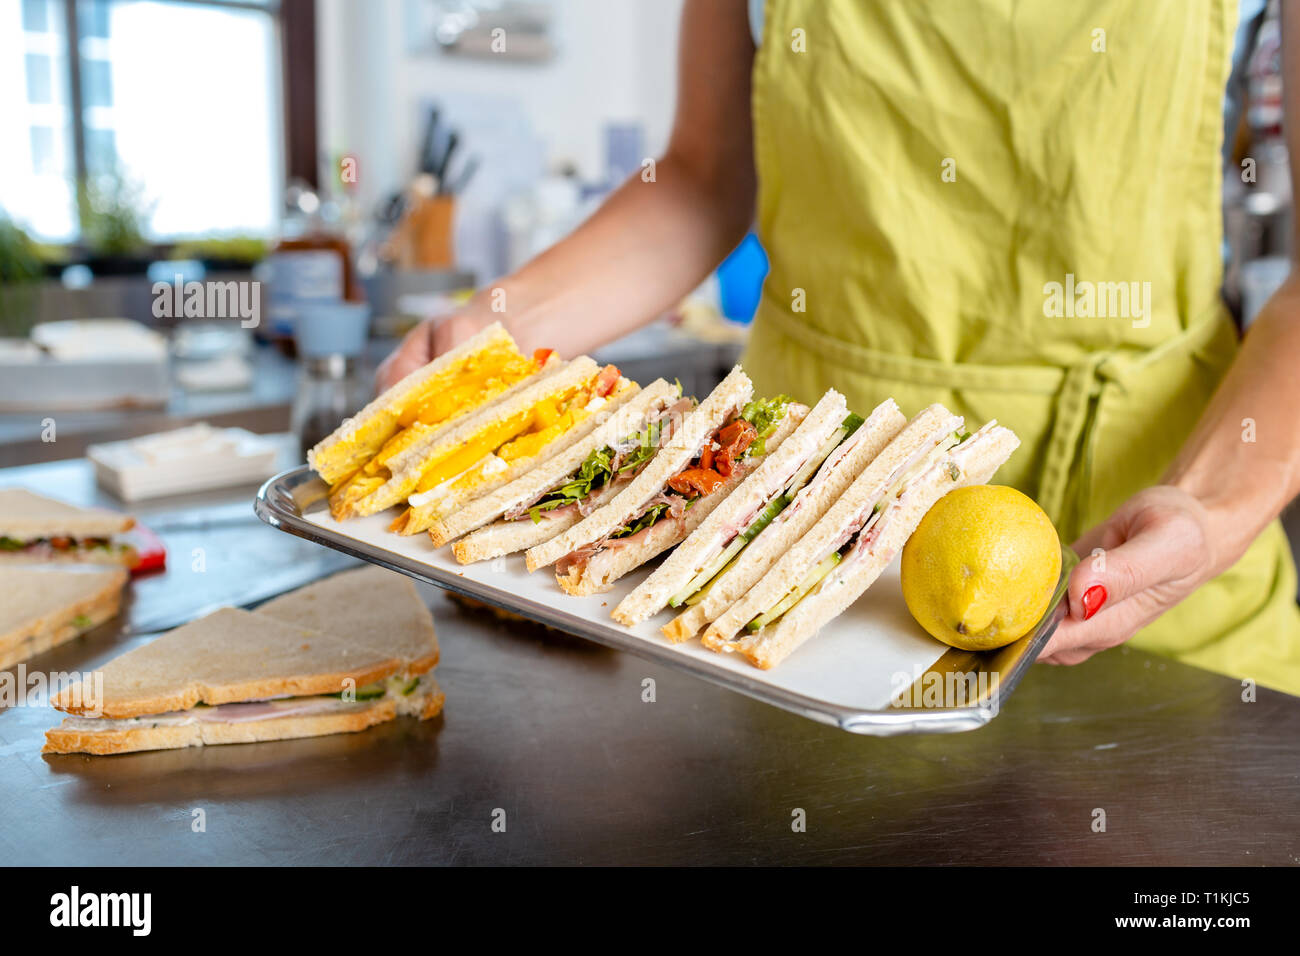 Woman's hand carrying sandwich in tray Stock Photo